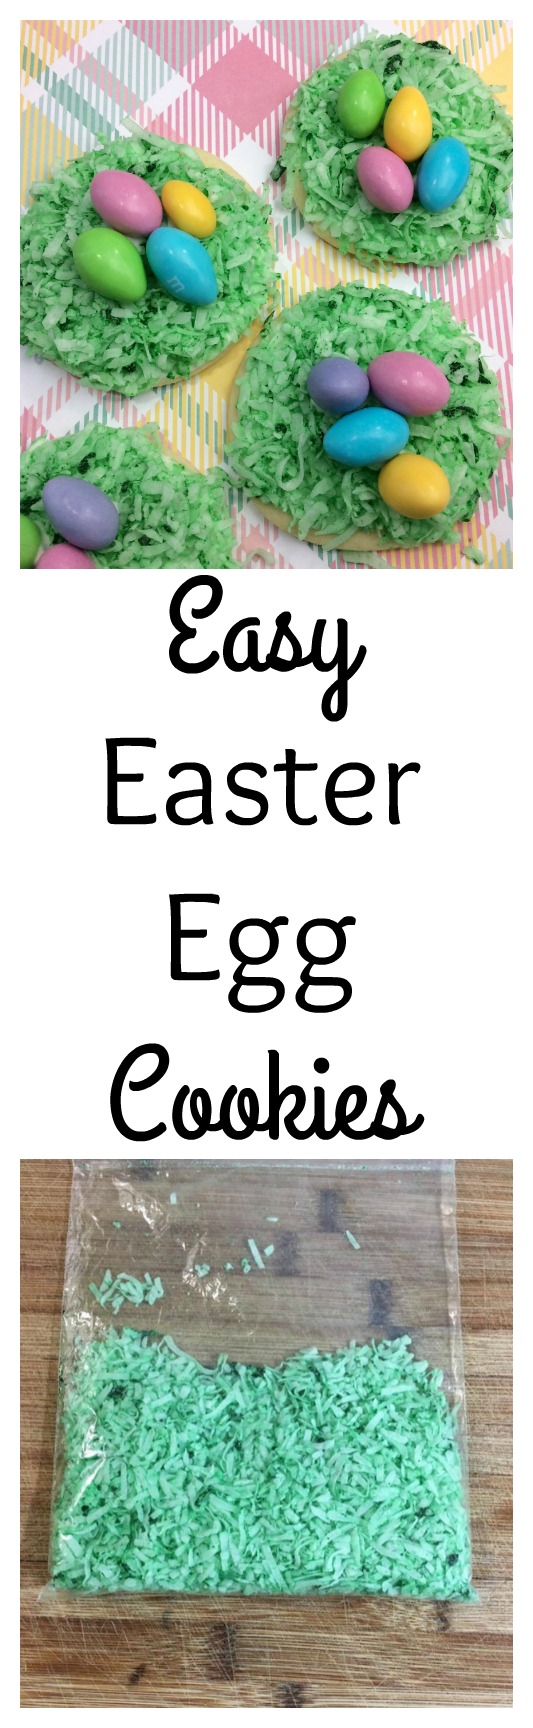 Easter Egg cookies that are simple to make but everyone will think came from the bakery. Easy Easter Cookies that the kids will love.